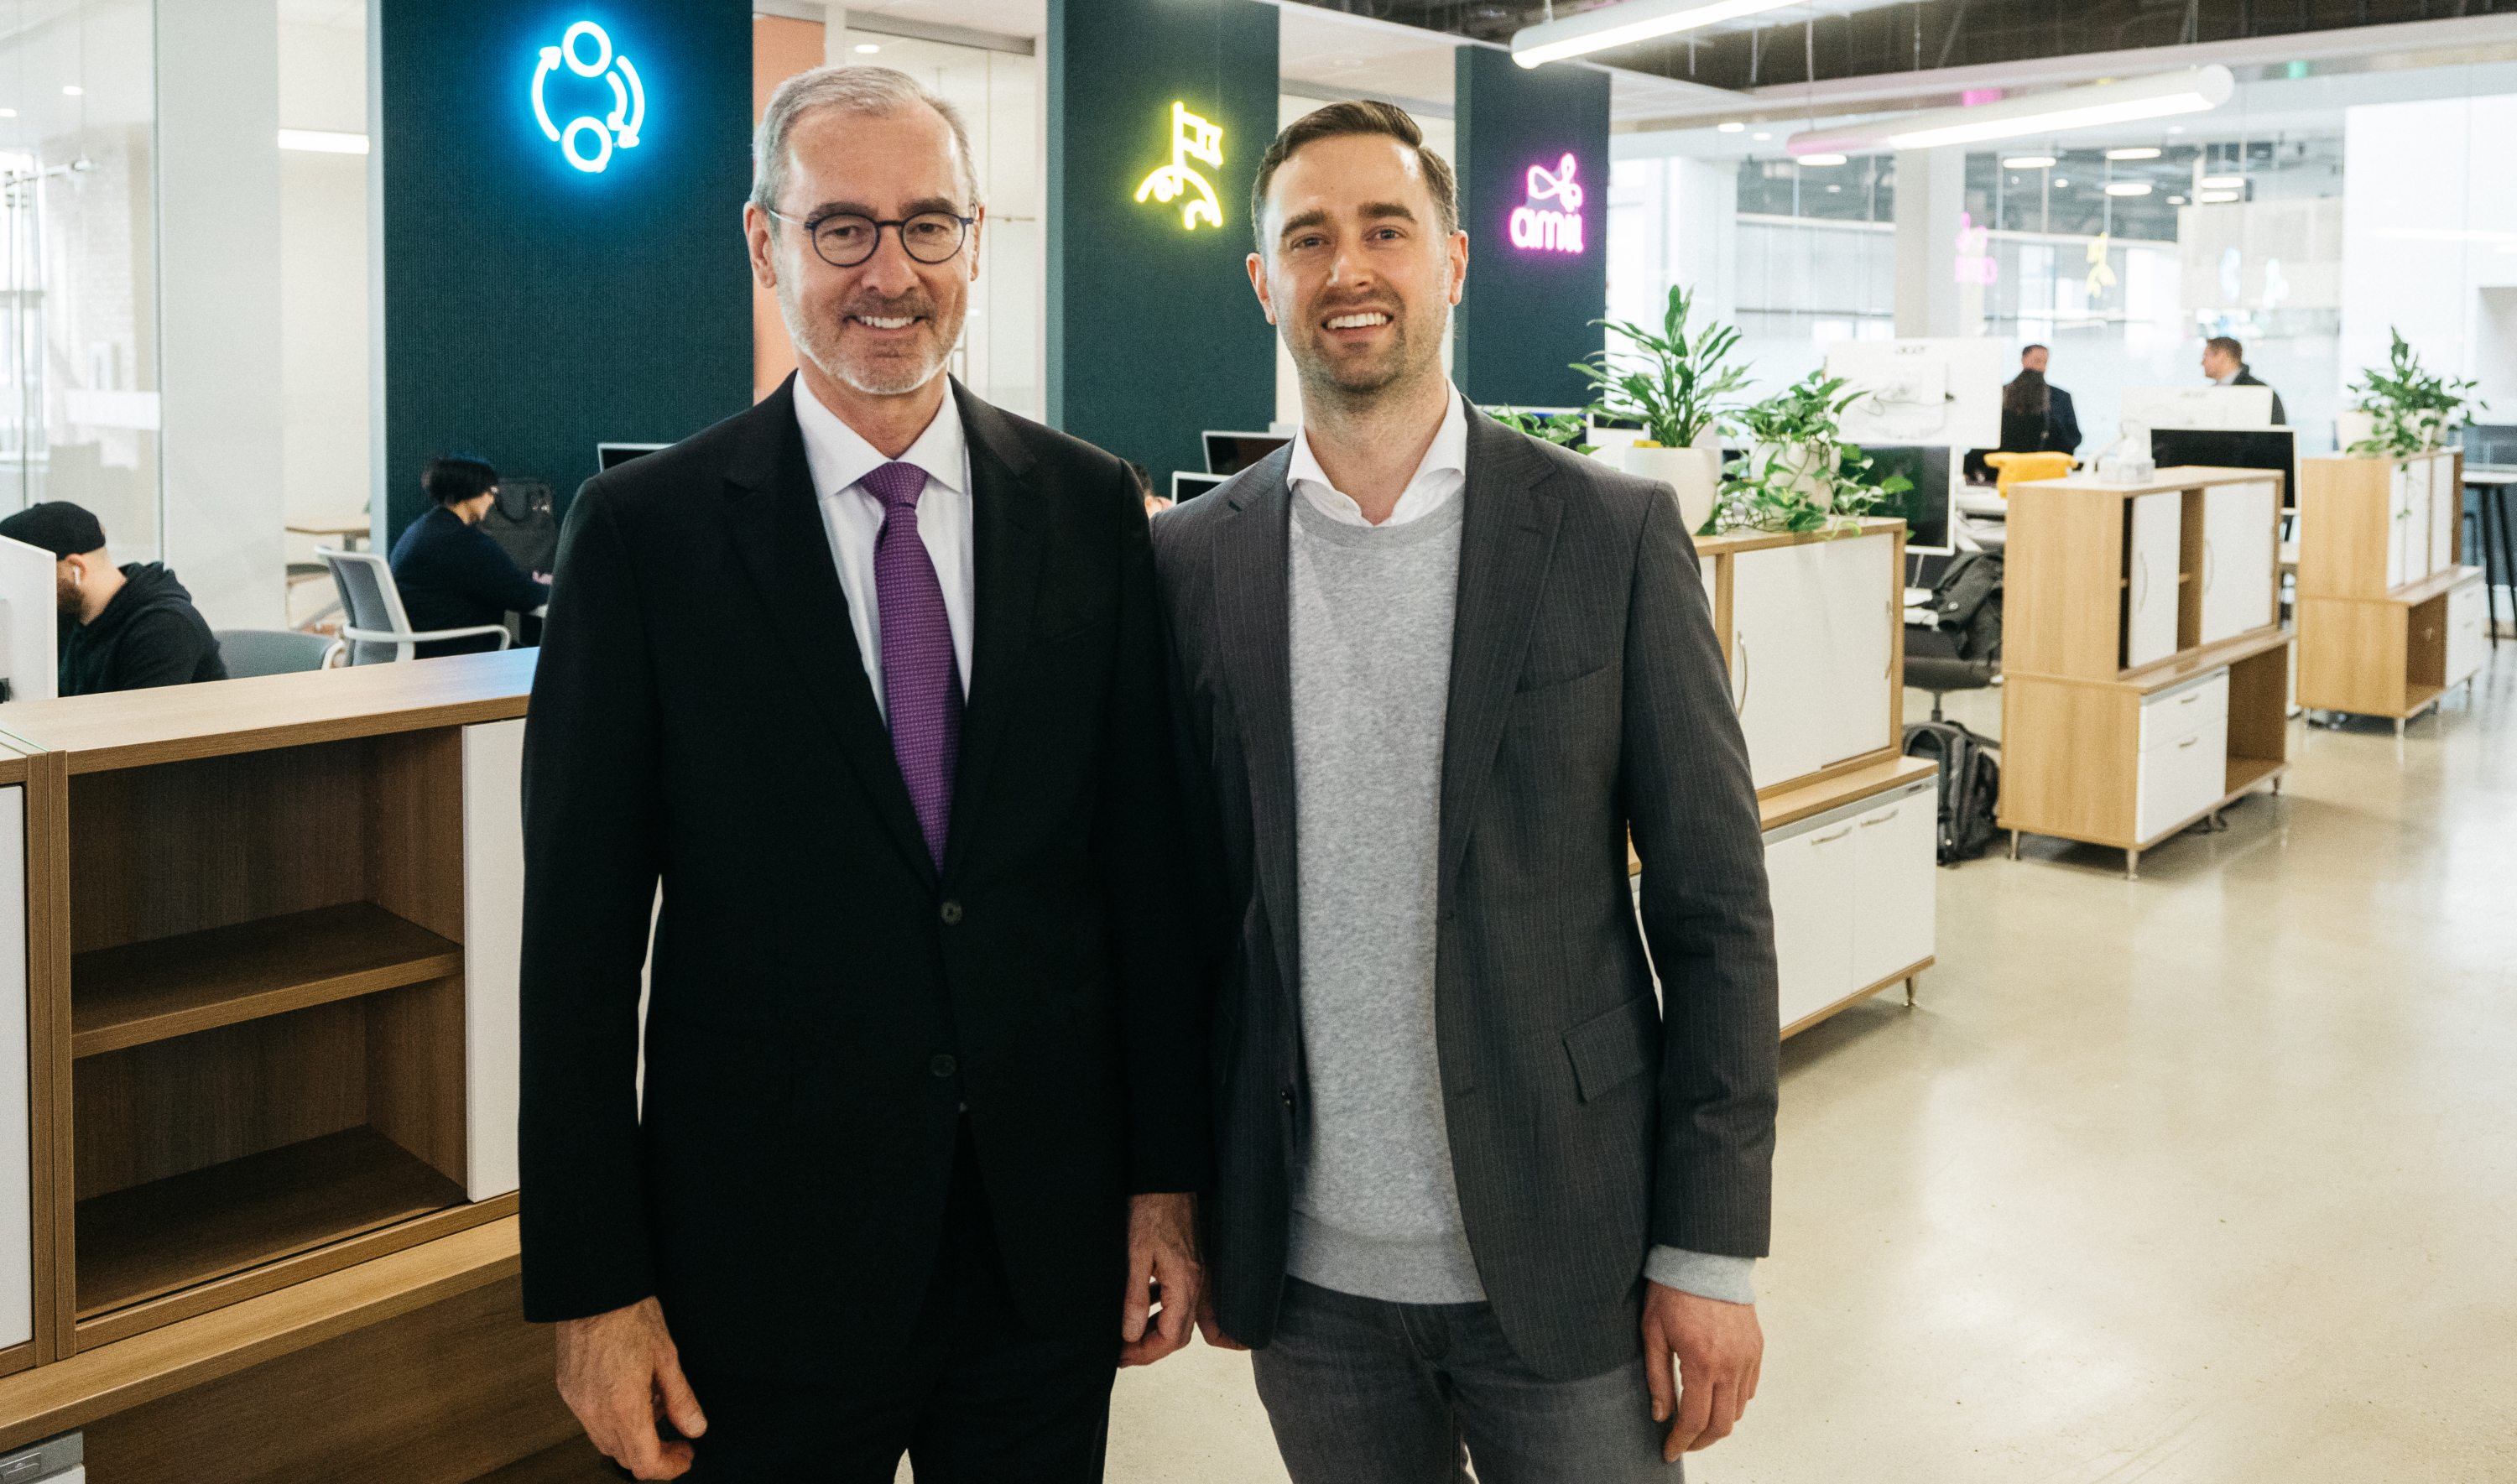 U of A president Bill Flanagan (left) and Amii CEO Cam Linke were at Amii's downtown Edmonton headquarters today to announce $30 million in funding for 20 new Canada CIFAR AI Chairs. (Photo: Cooper & O’Hara)